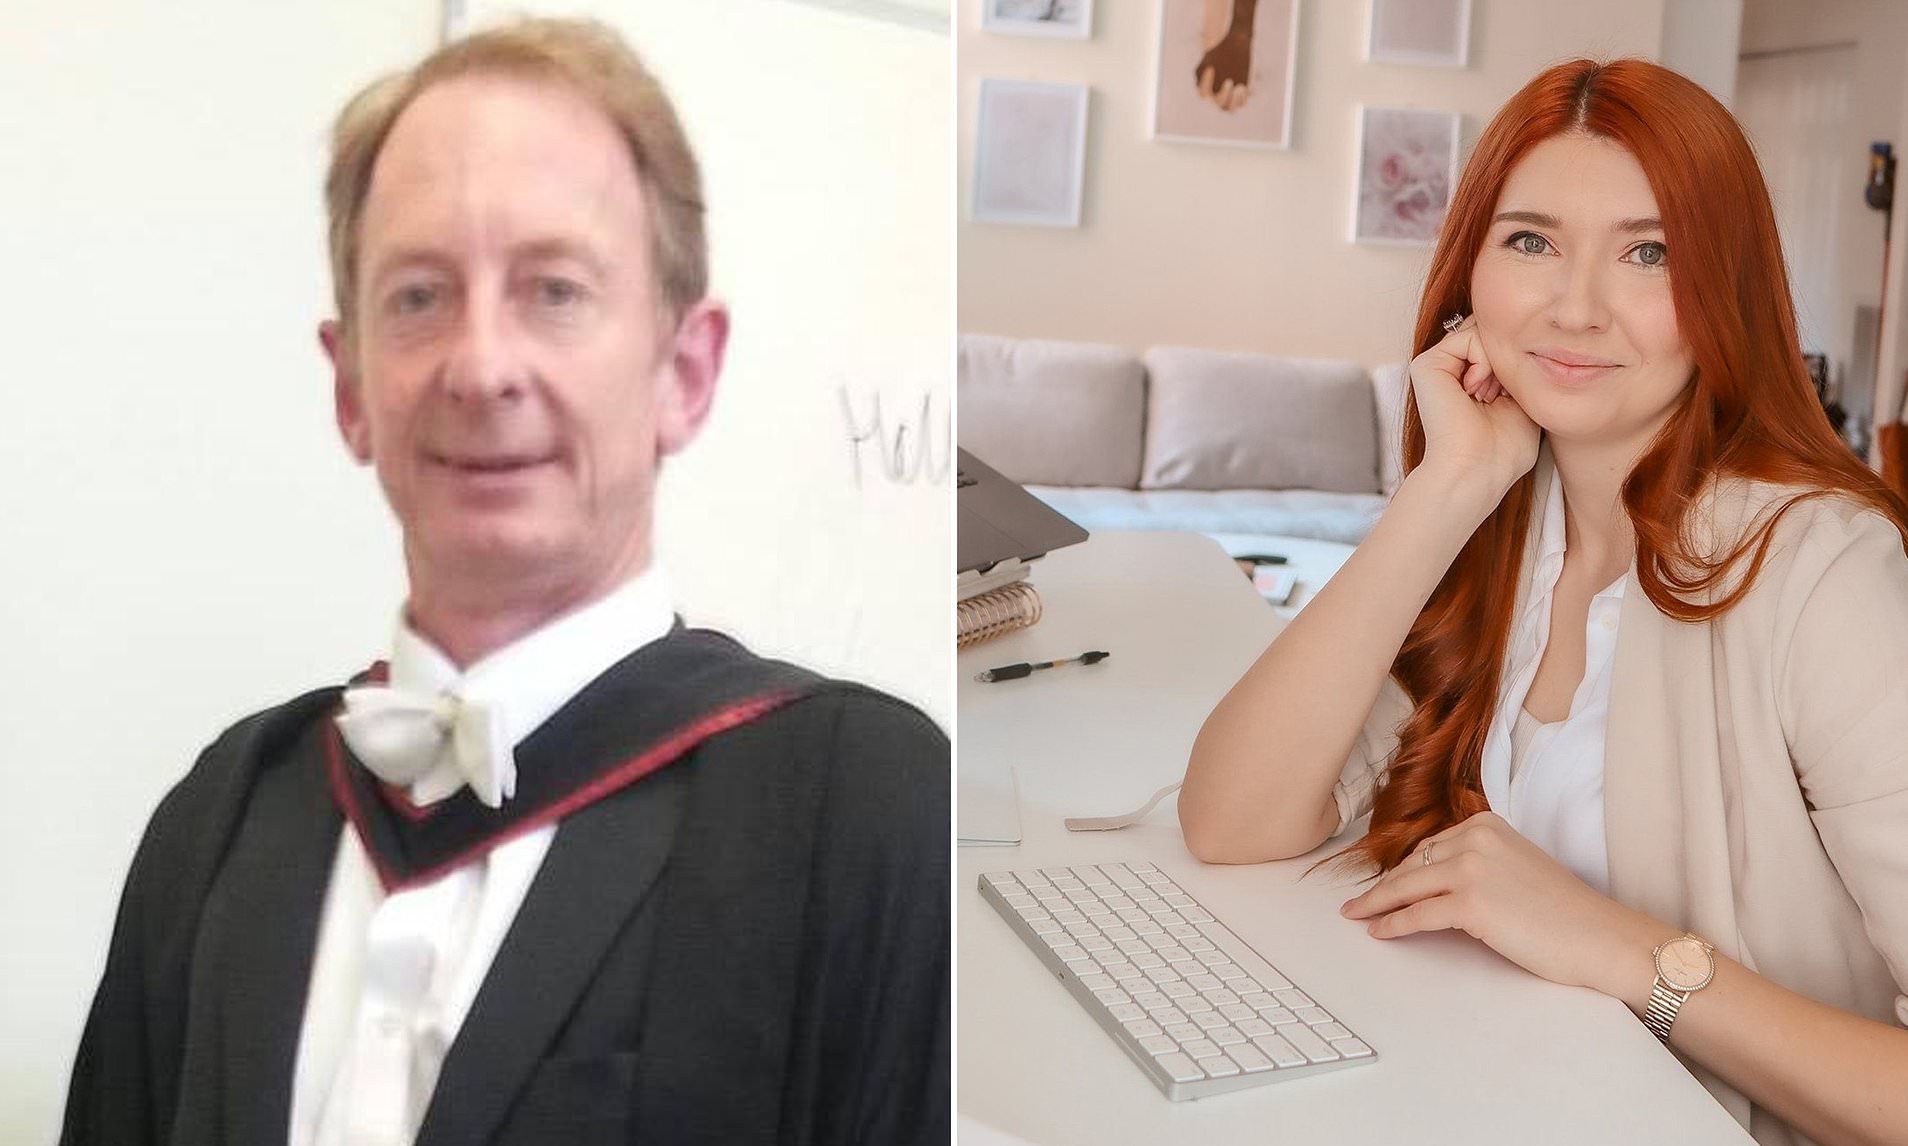 Married Oxford history professor is banned from teaching over sexual harassment